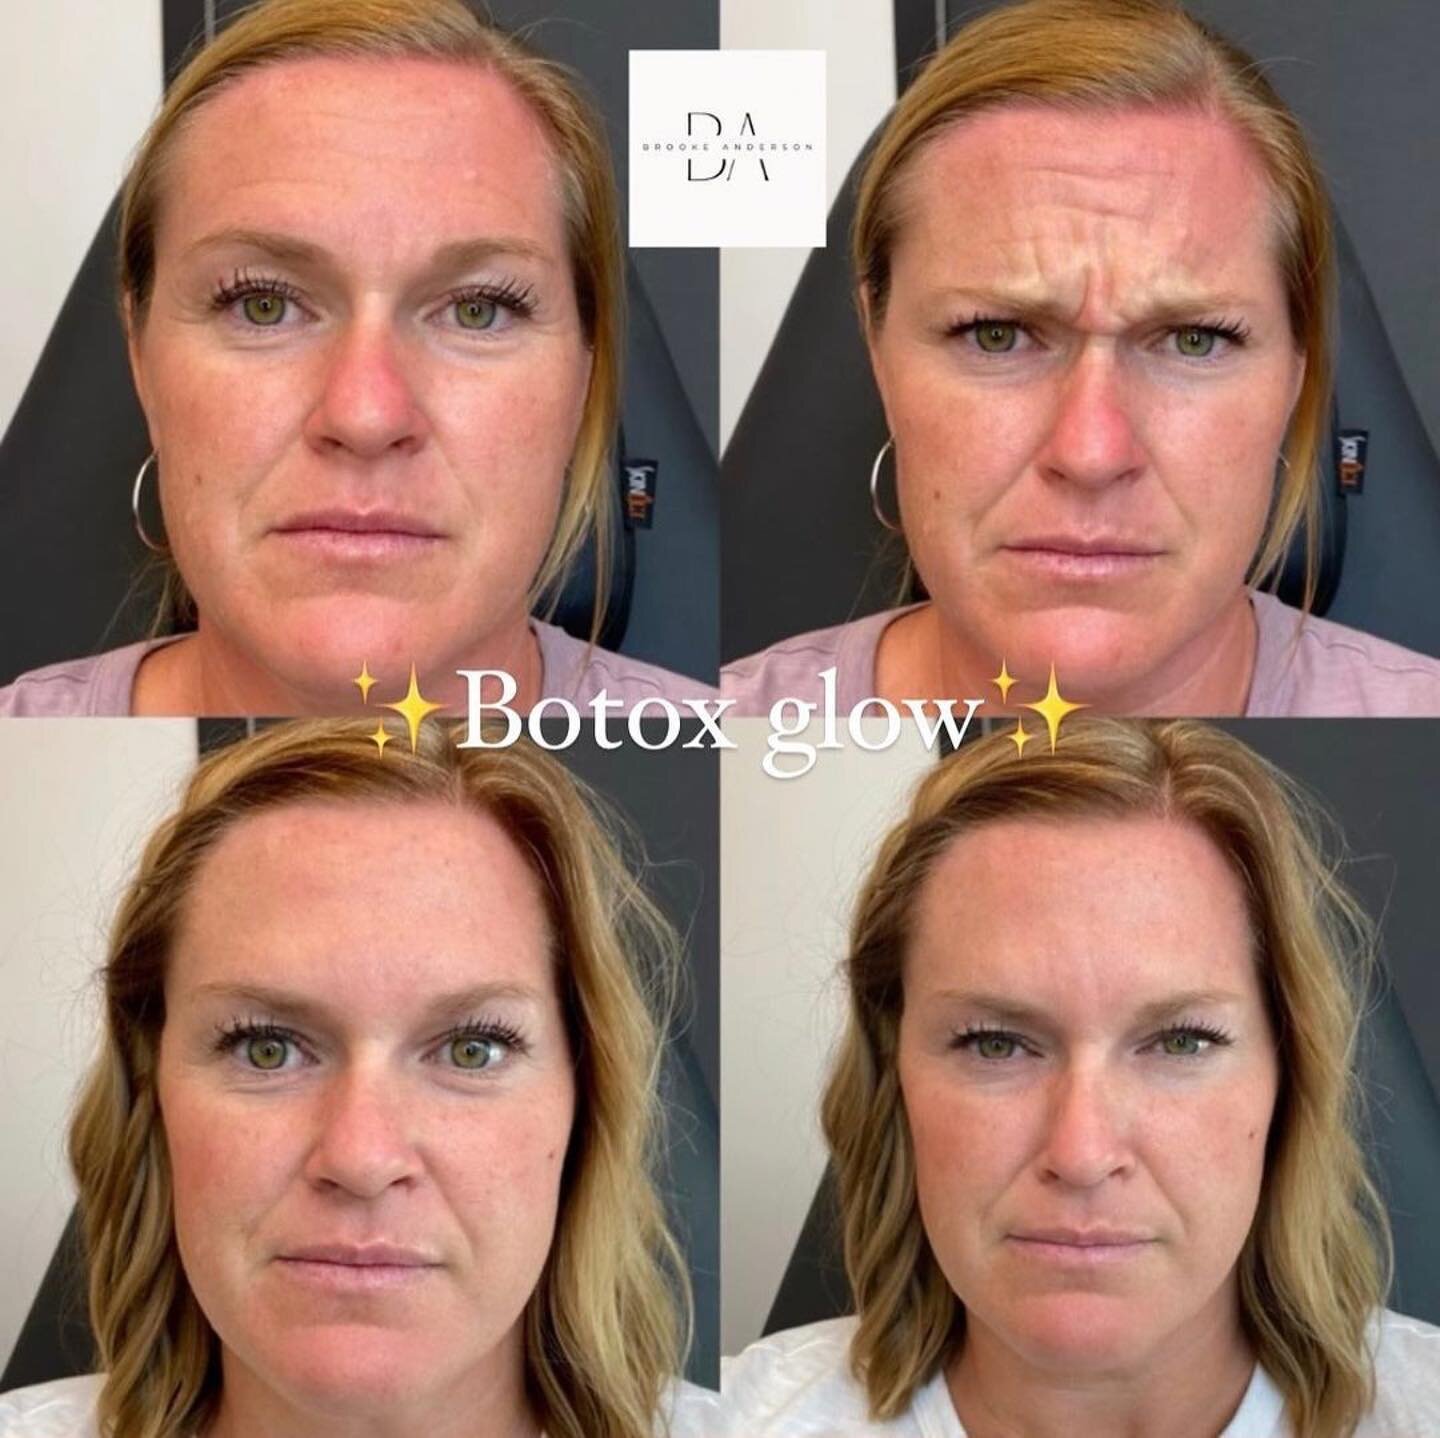 #Repost @brooke.beauty.injector
・・・
✨Just Botox ✨
This is why WE LOVE  this stuff so much!!! This beautiful lady just had her first treatment and she&rsquo;s thrilled. 

#mavenmagic #beautyinjector #mavenmedicalarts #botoxslc #allerganAmi #botoxglow